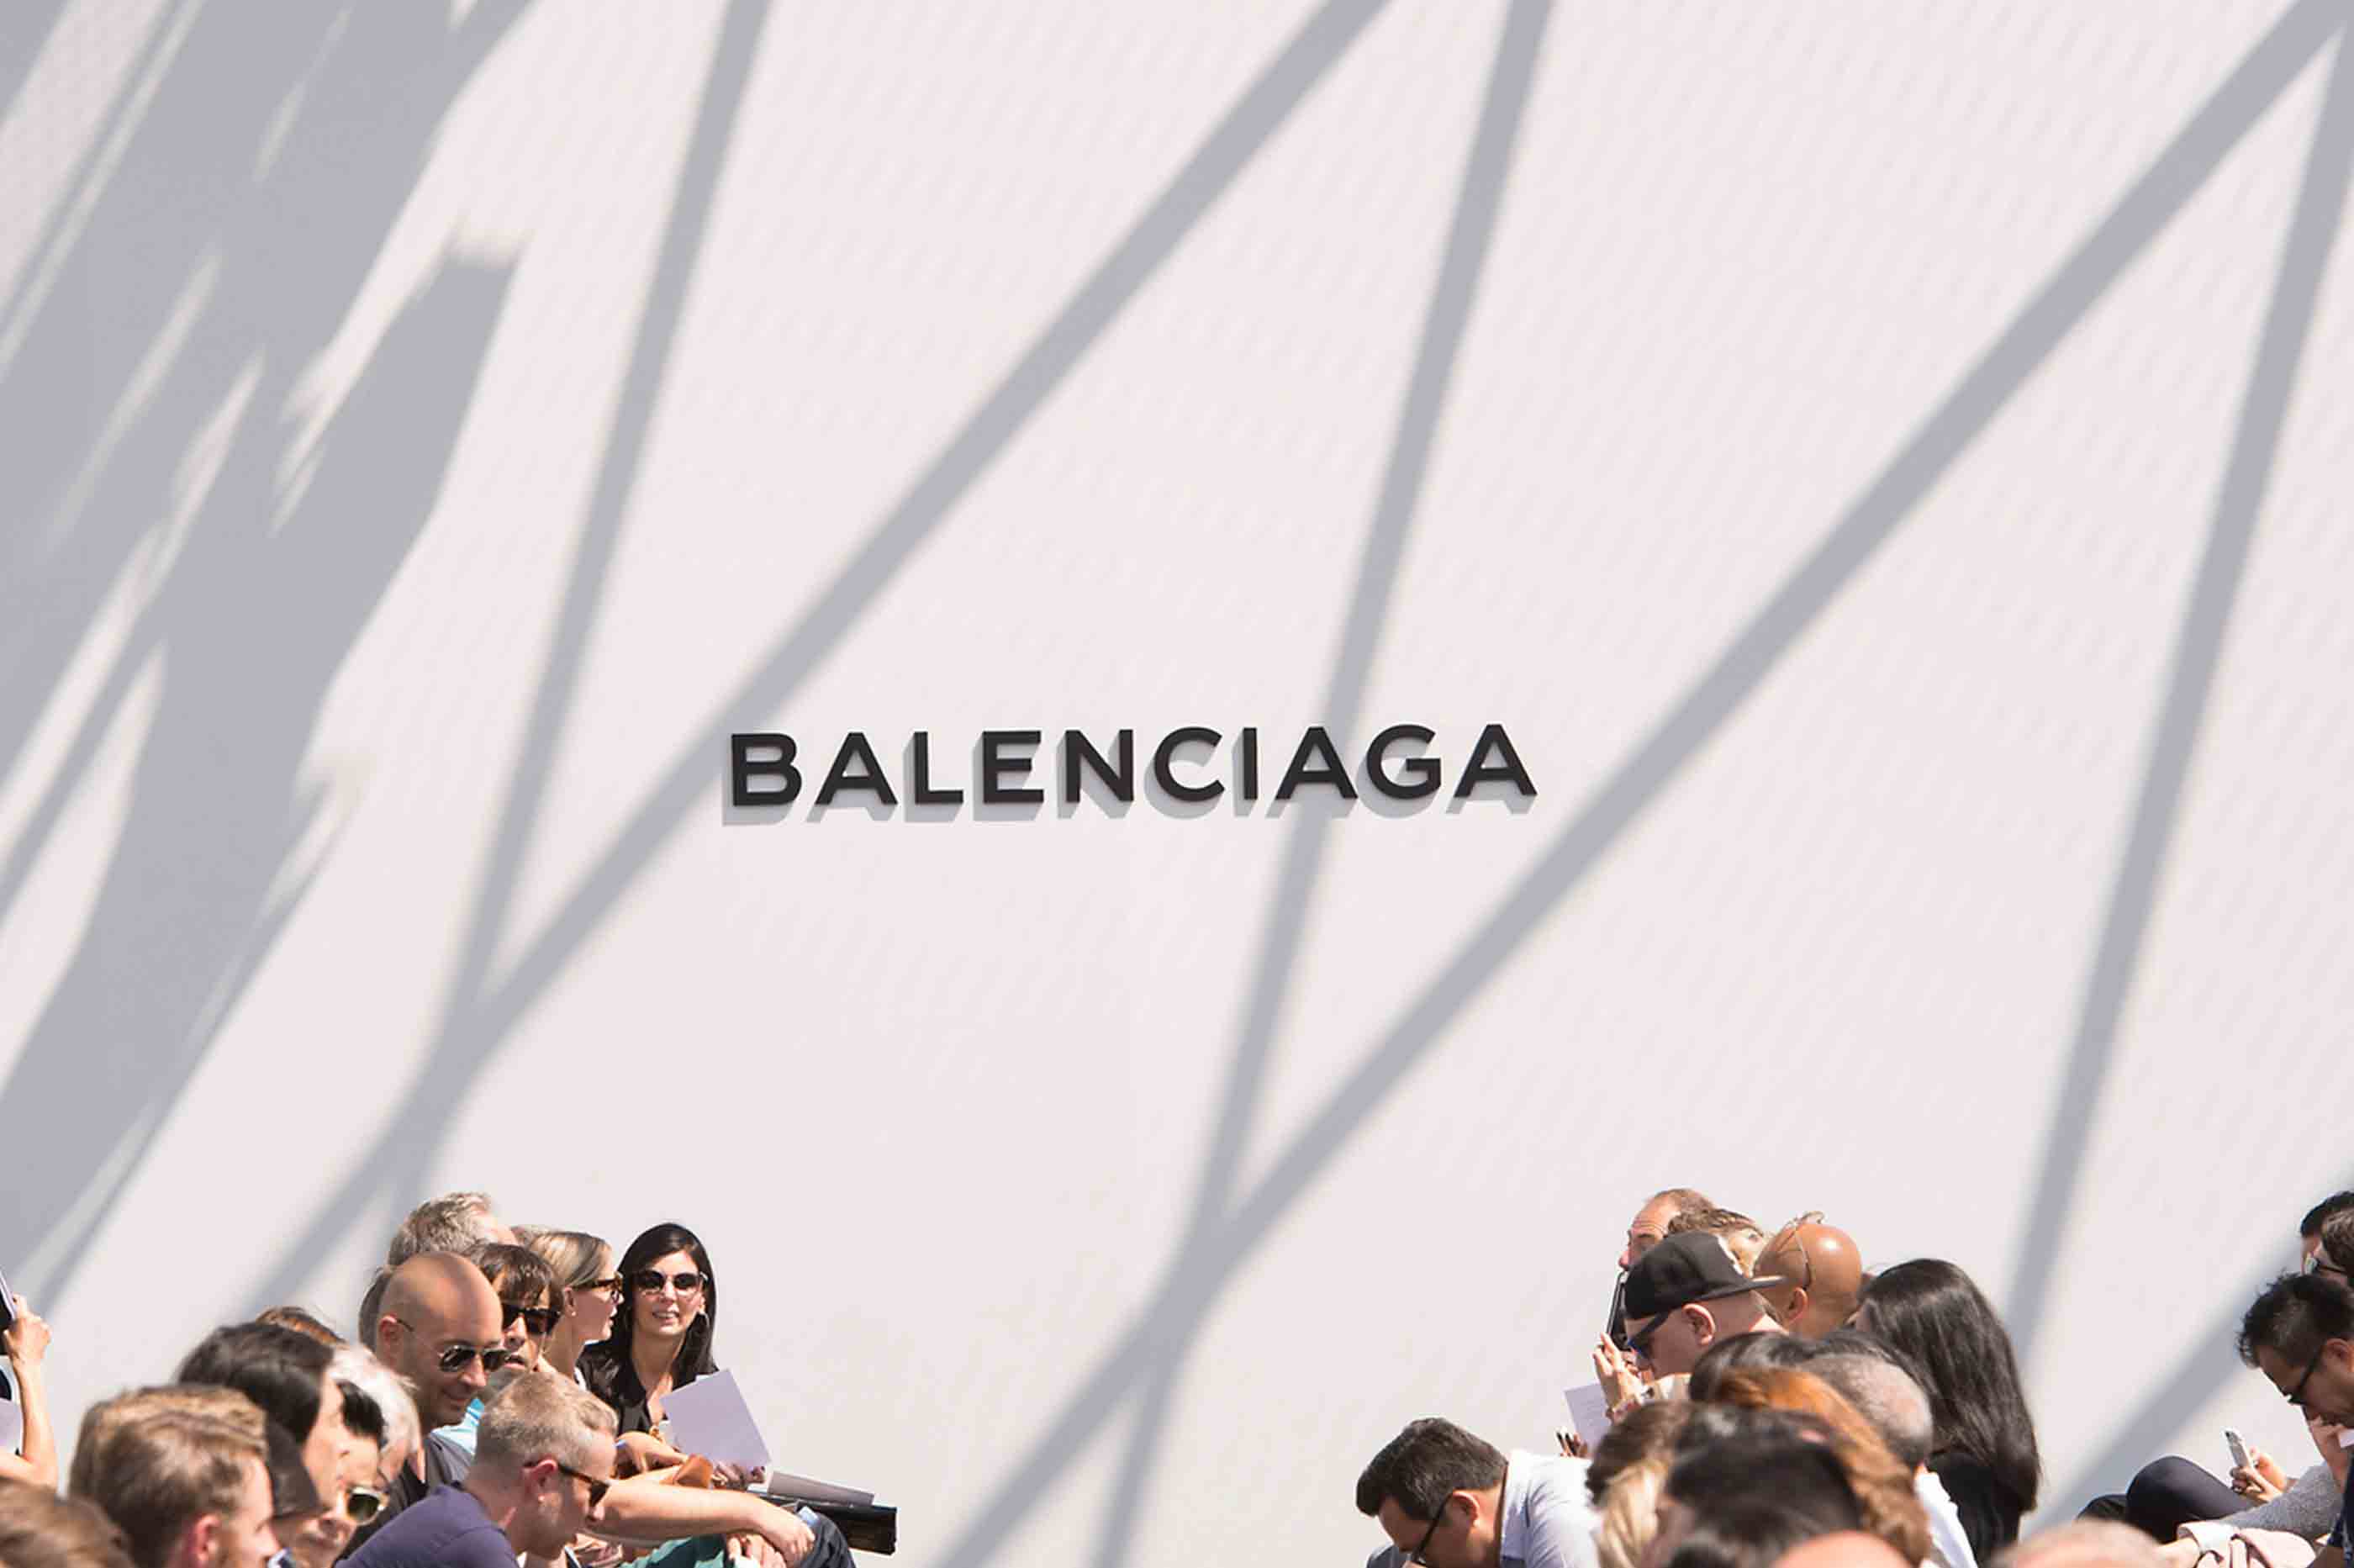 Balenciaga partners with National Children's Alliance after its ad